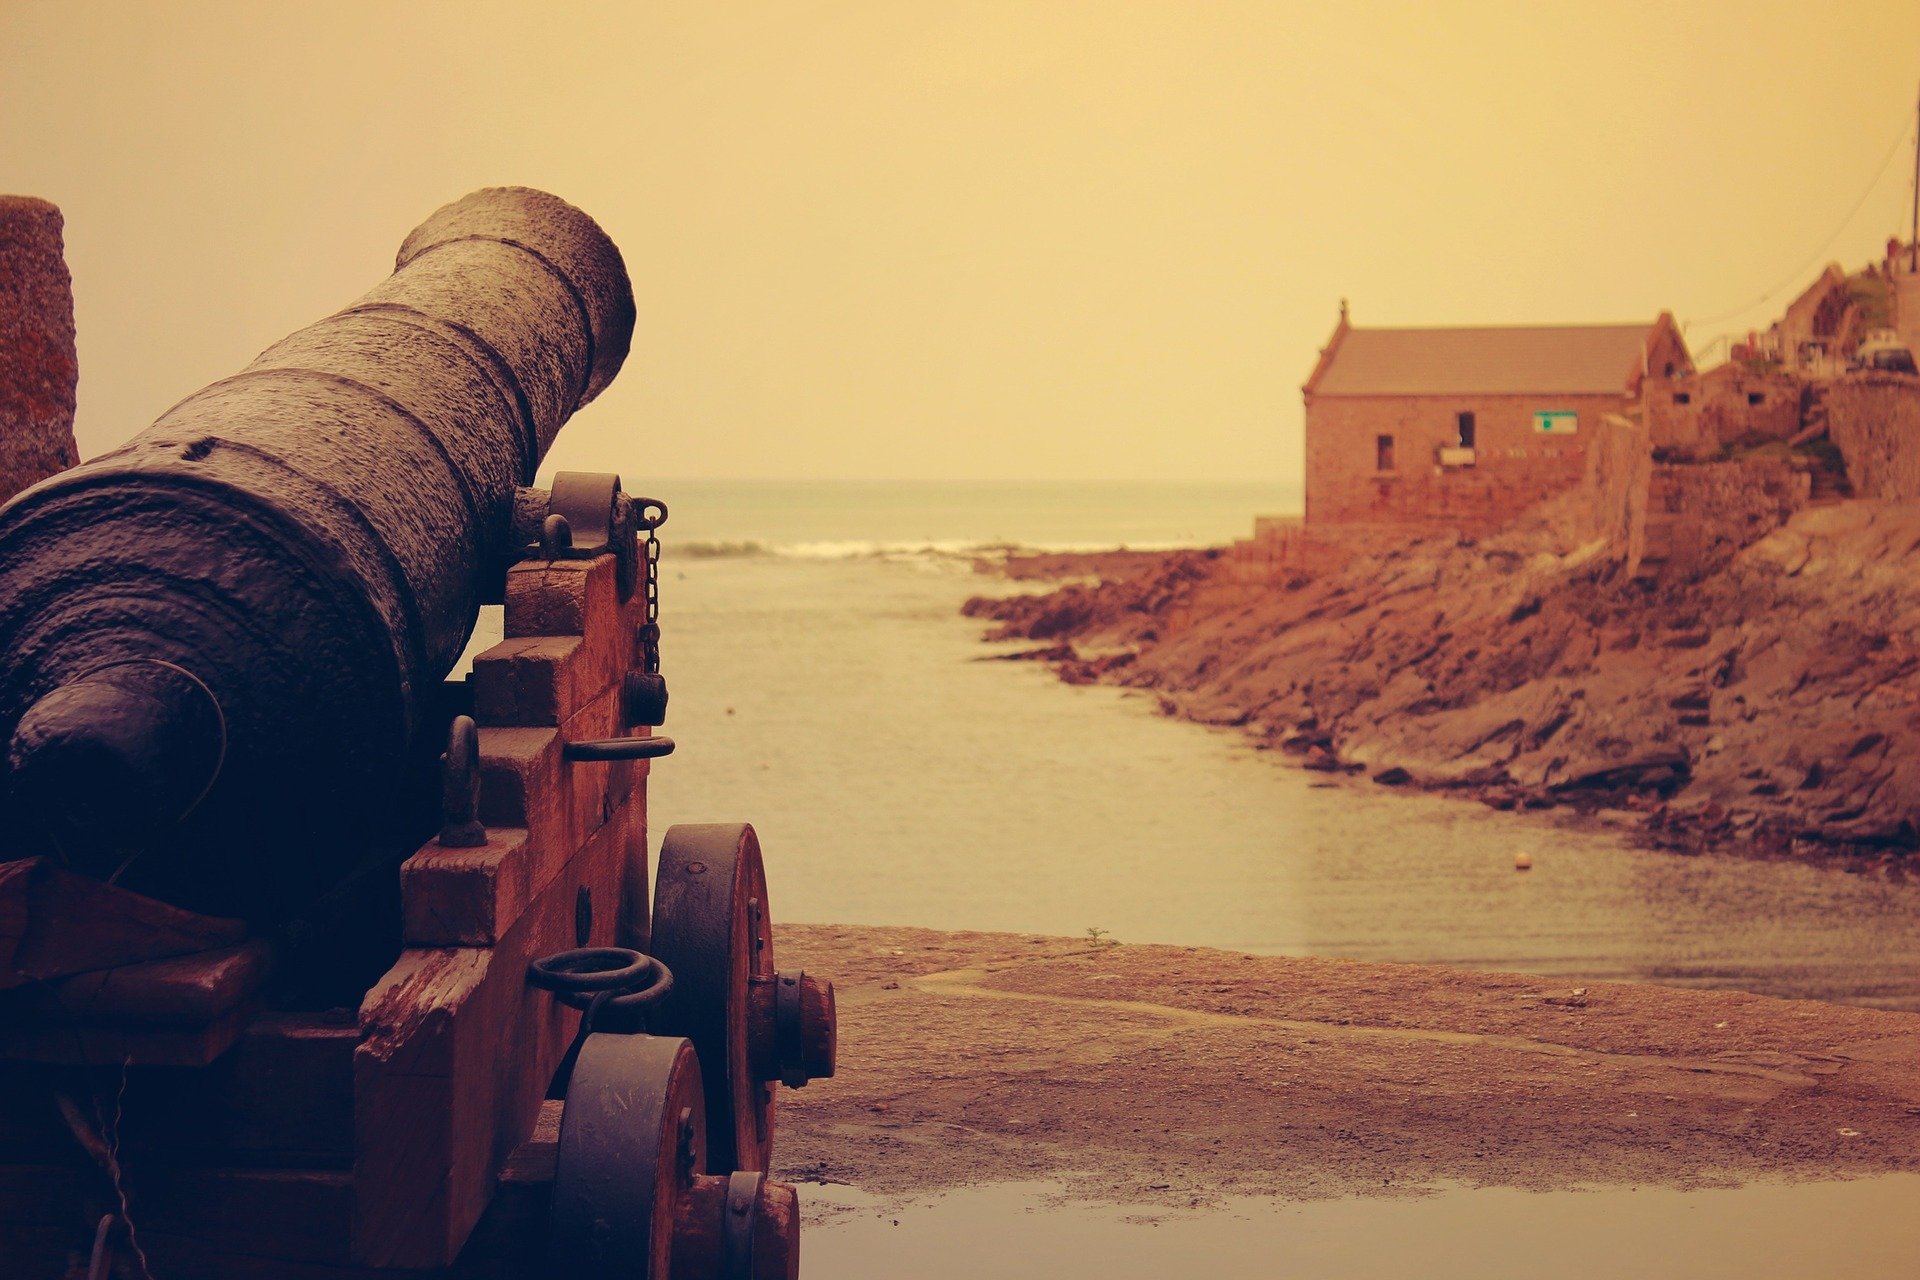 A cannon facing the seashore with a house in the distance | Photo: Pixabay/Free-Photos